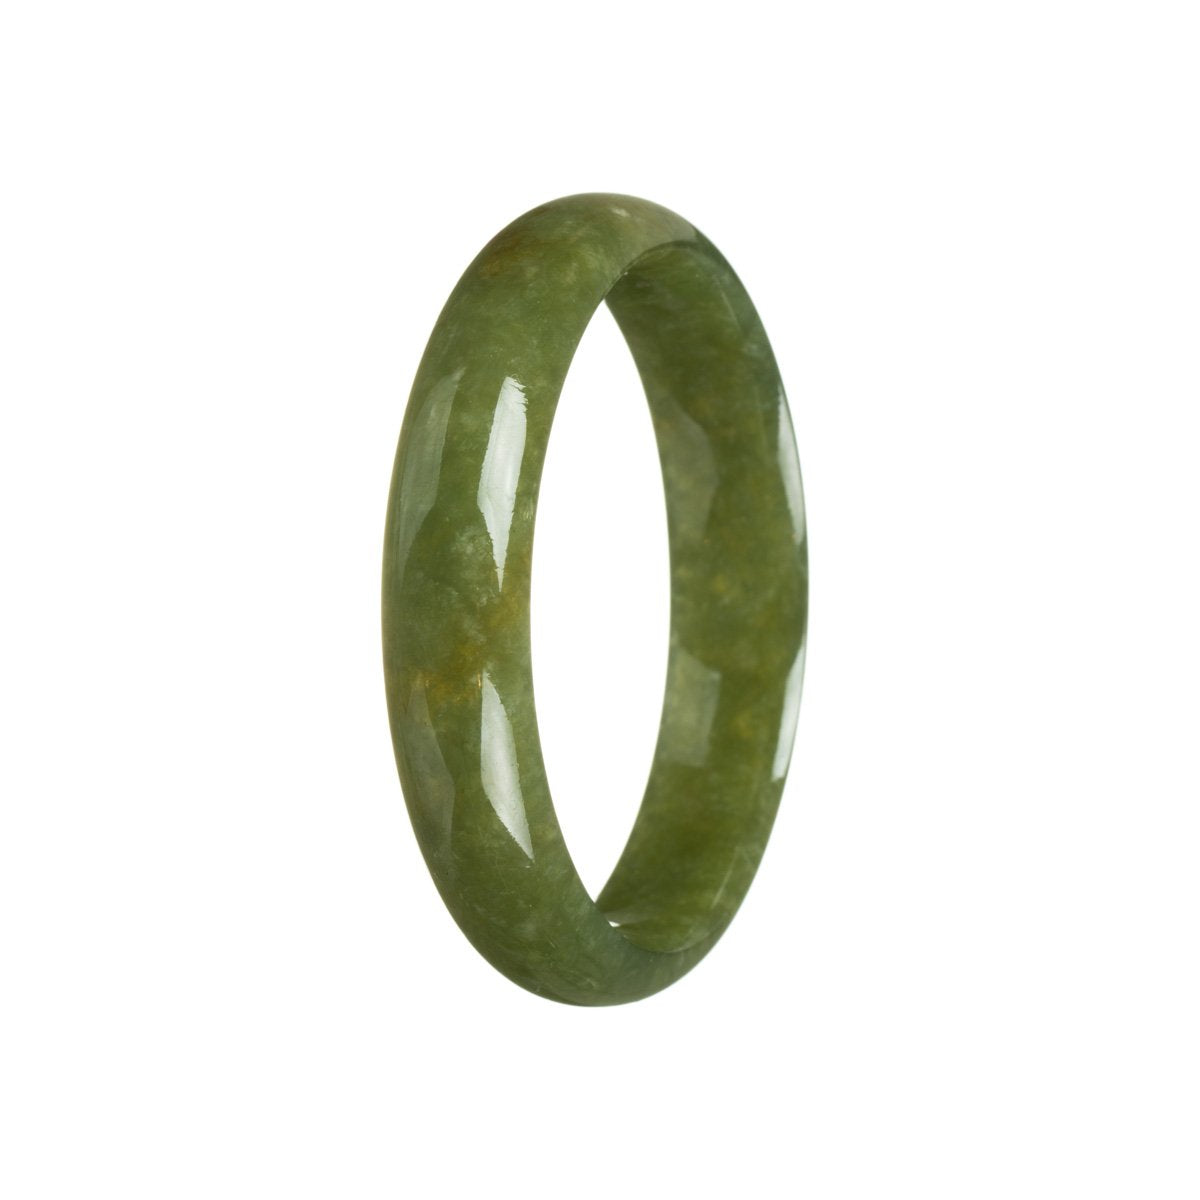 A half-moon shaped olive green Burmese jade bangle, measuring 54mm, in a genuine Type A quality.